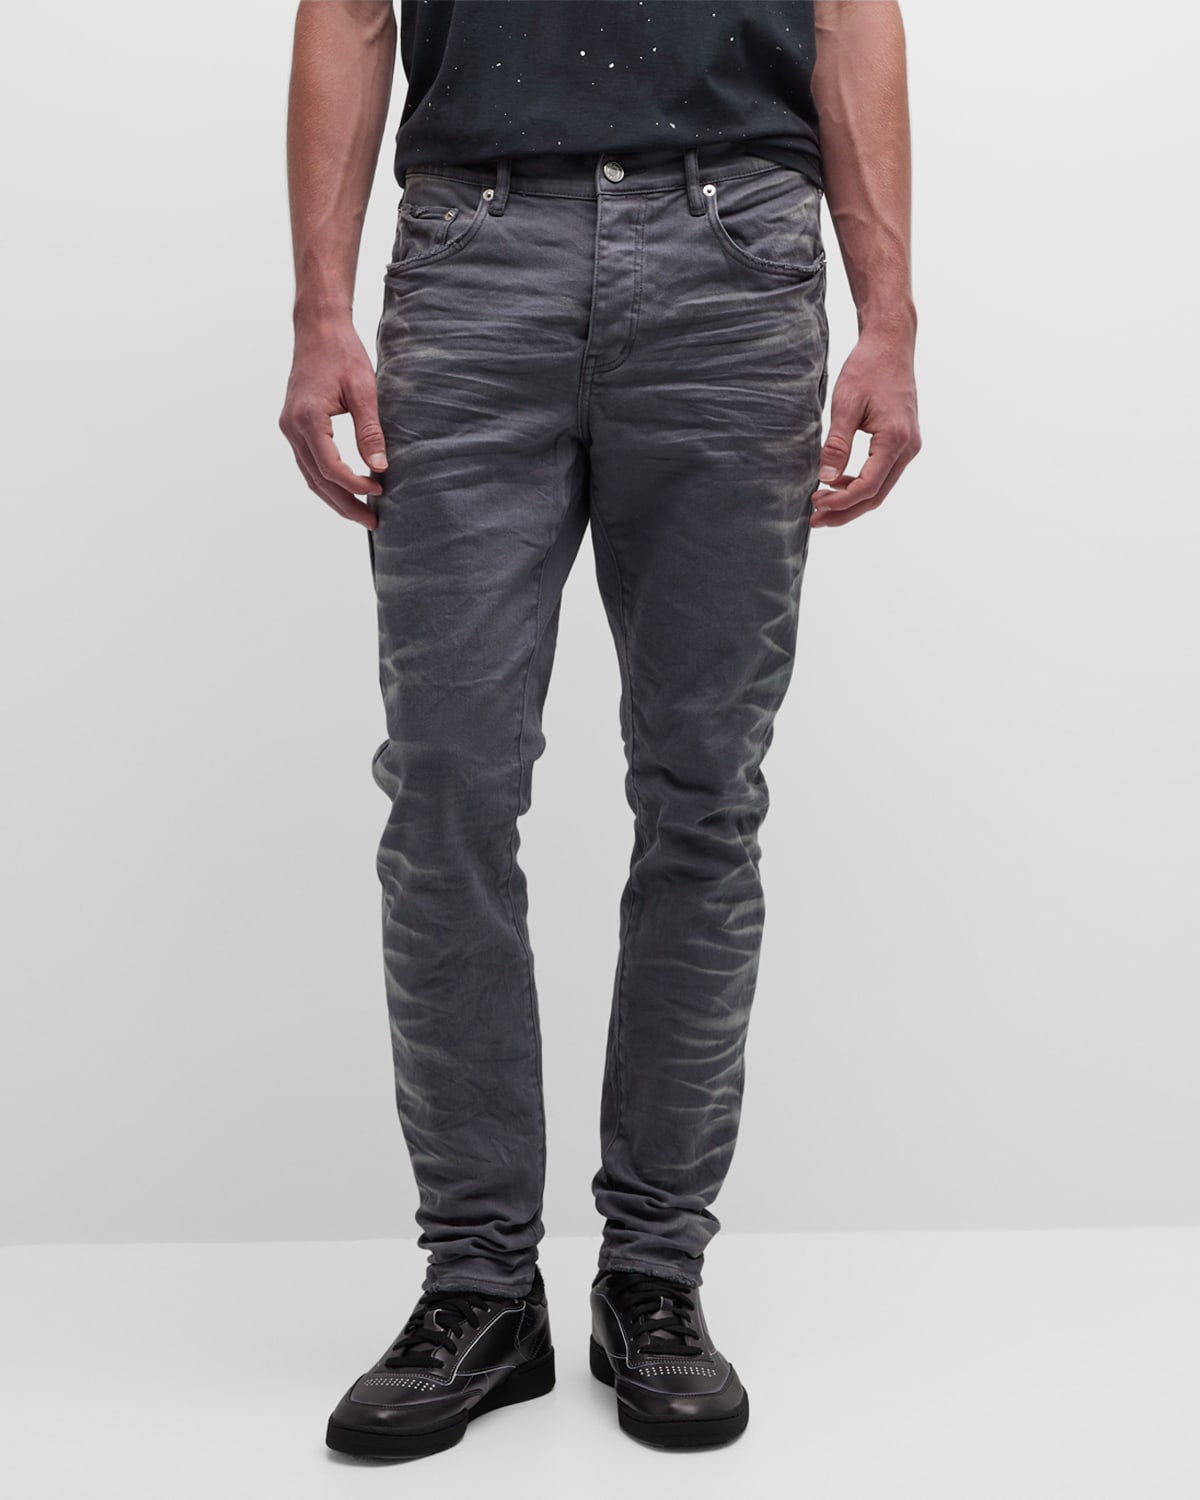 Men's Charcoal Faded Side Seam Skinny Jeans